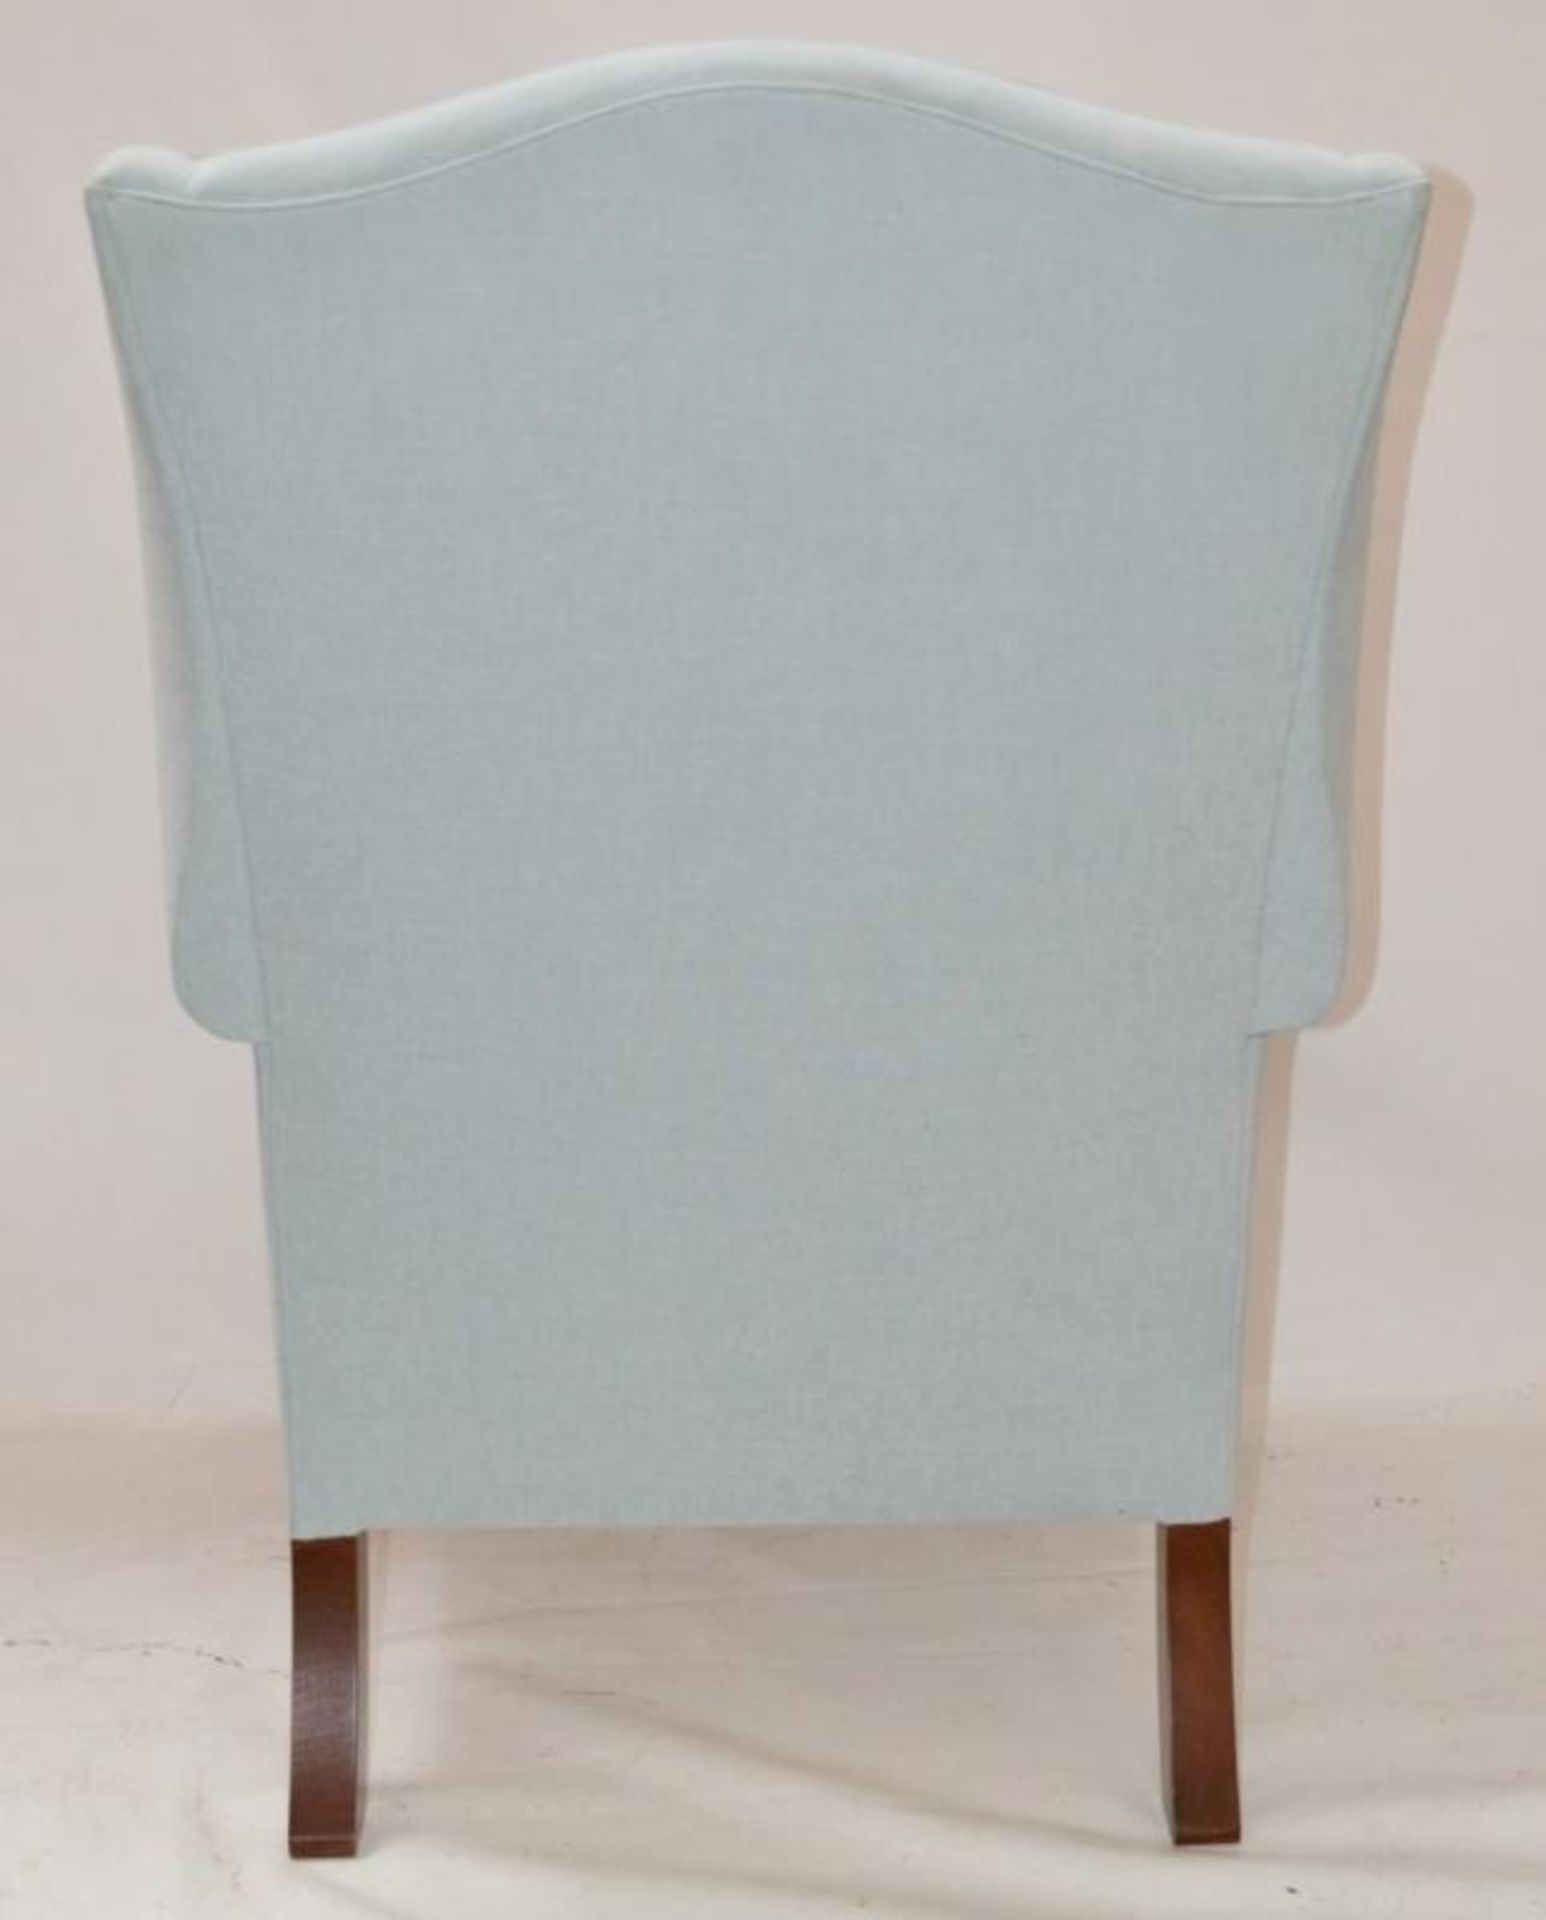 1 x Duresta "Somerset" Wing Chair Light Blue - Dimensions: 113H x 91W x 92D cms - Ref: 3143184-A NP1 - Image 8 of 8